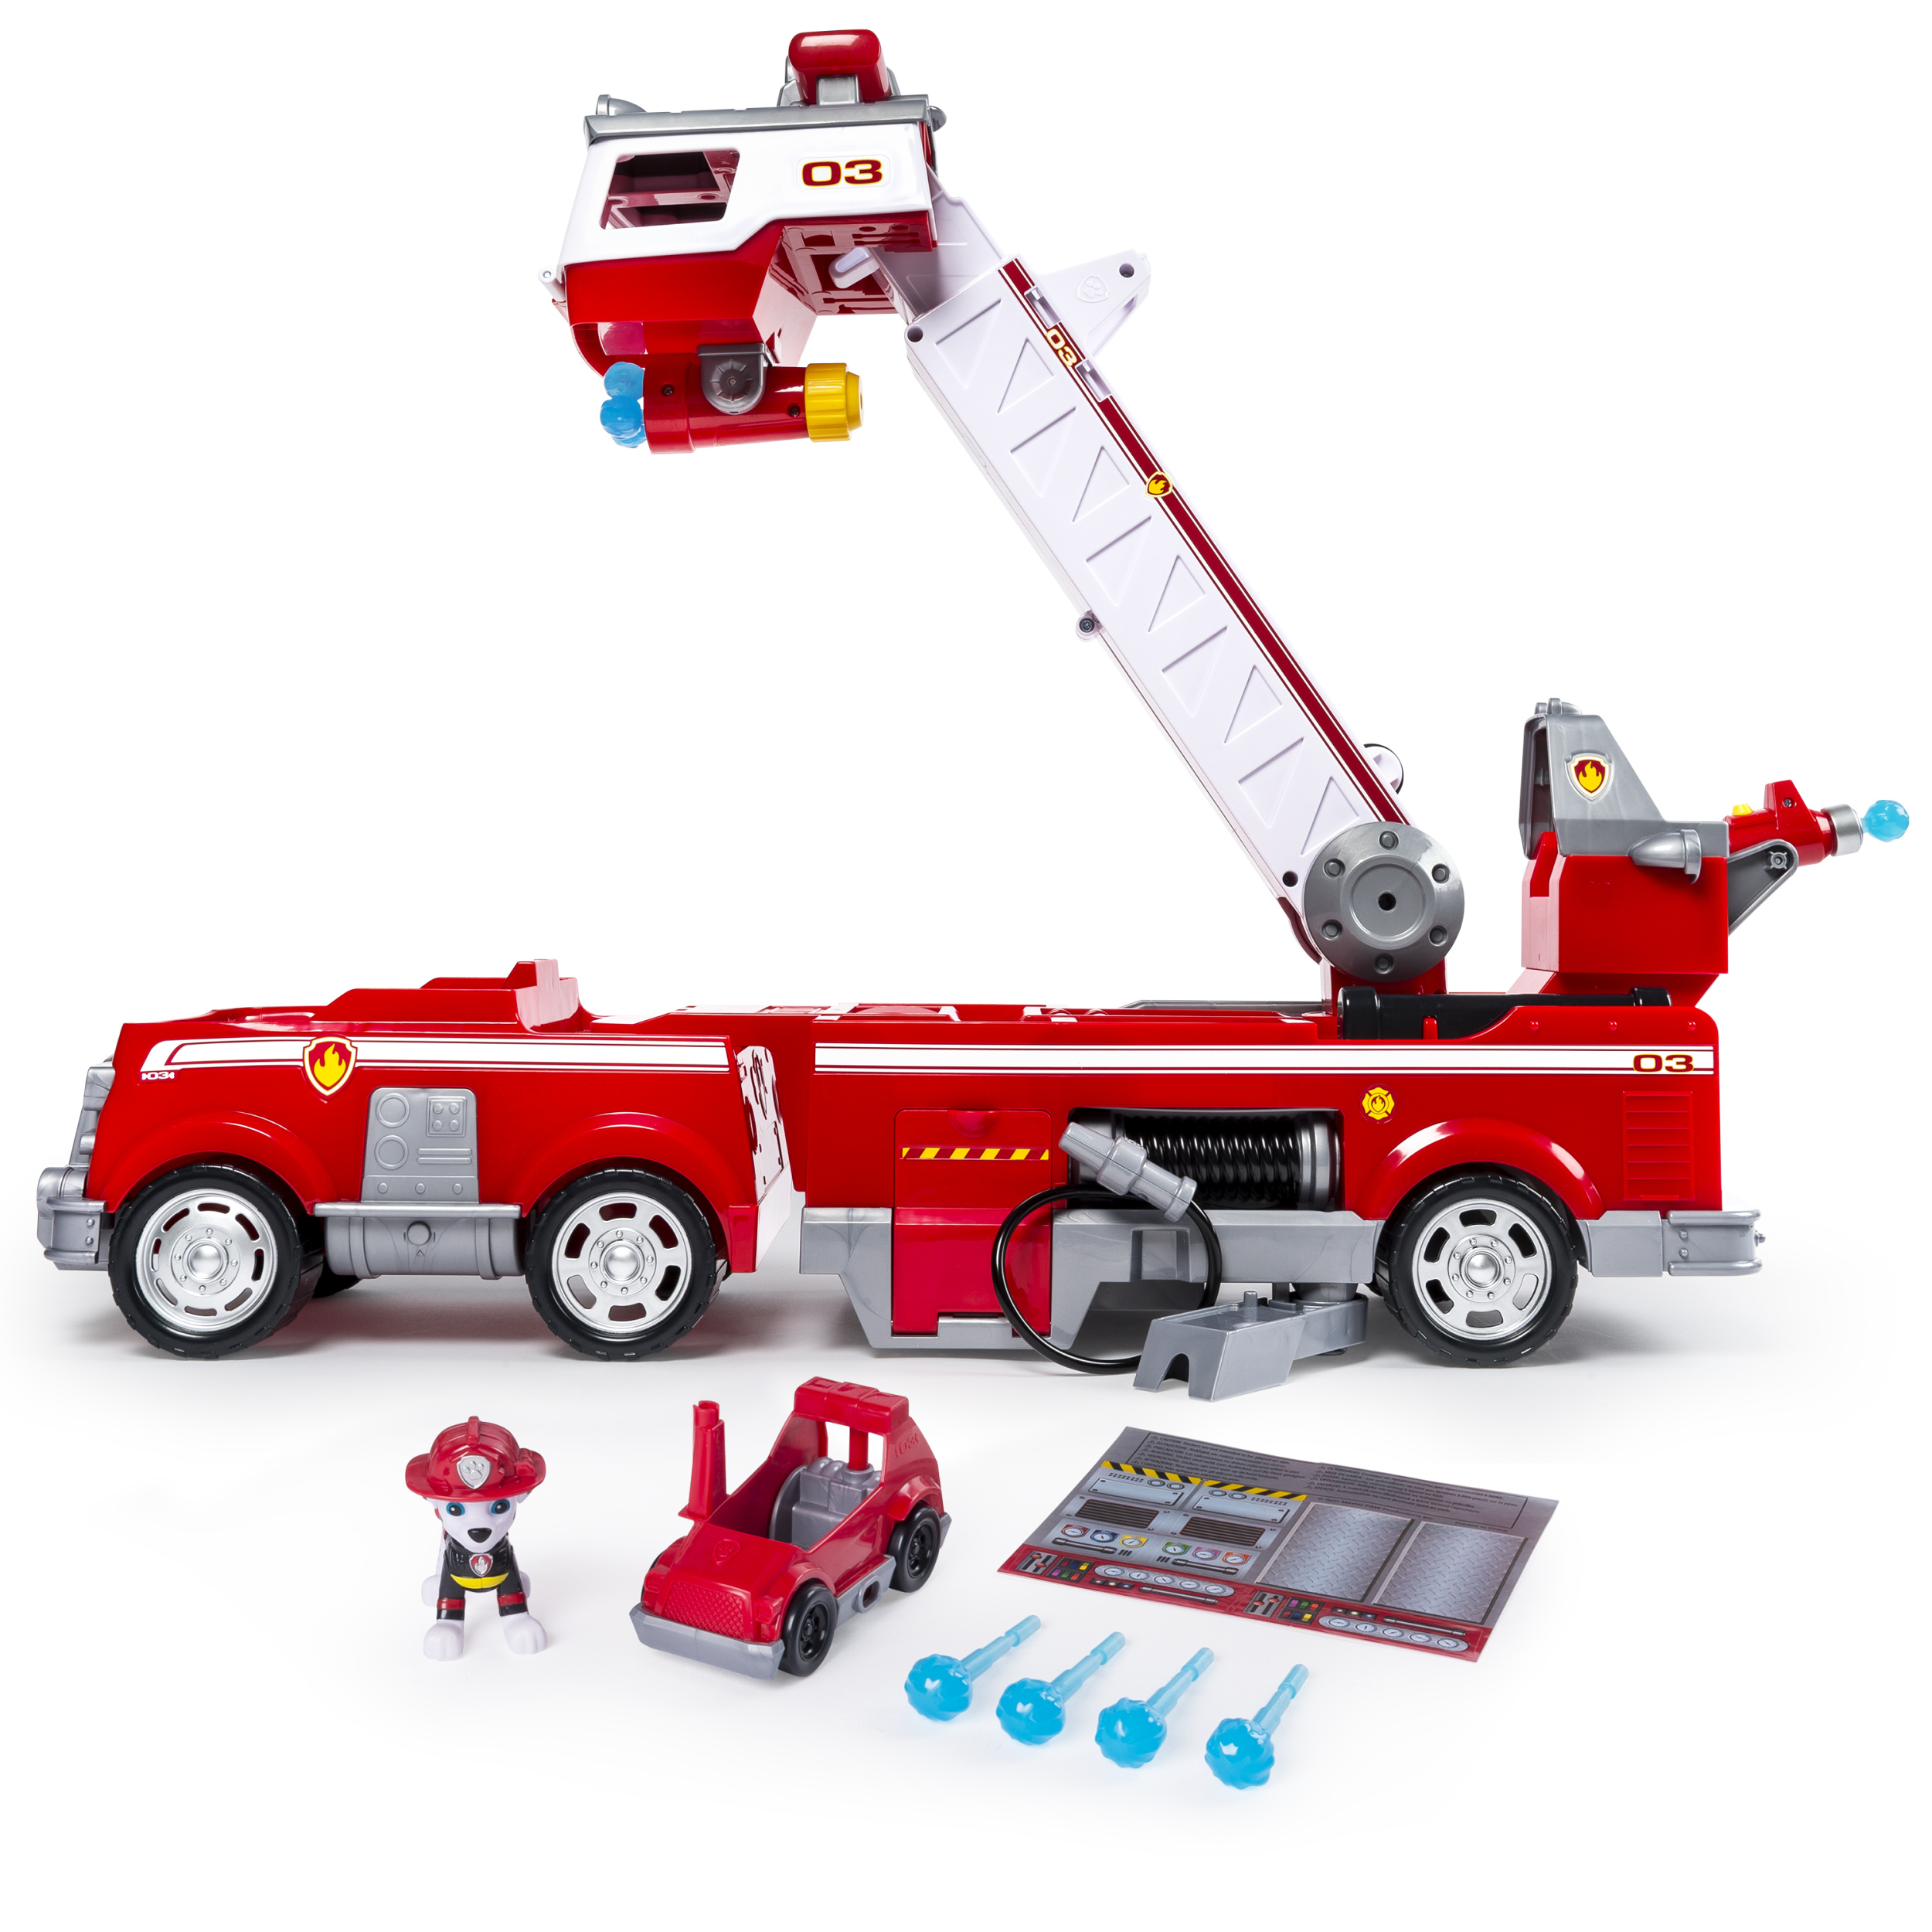 PAW Patrol Ultimate Rescue Fire Truck with Extendable 2 ft. Tall Ladder, for Ages 3 and Up - image 1 of 10